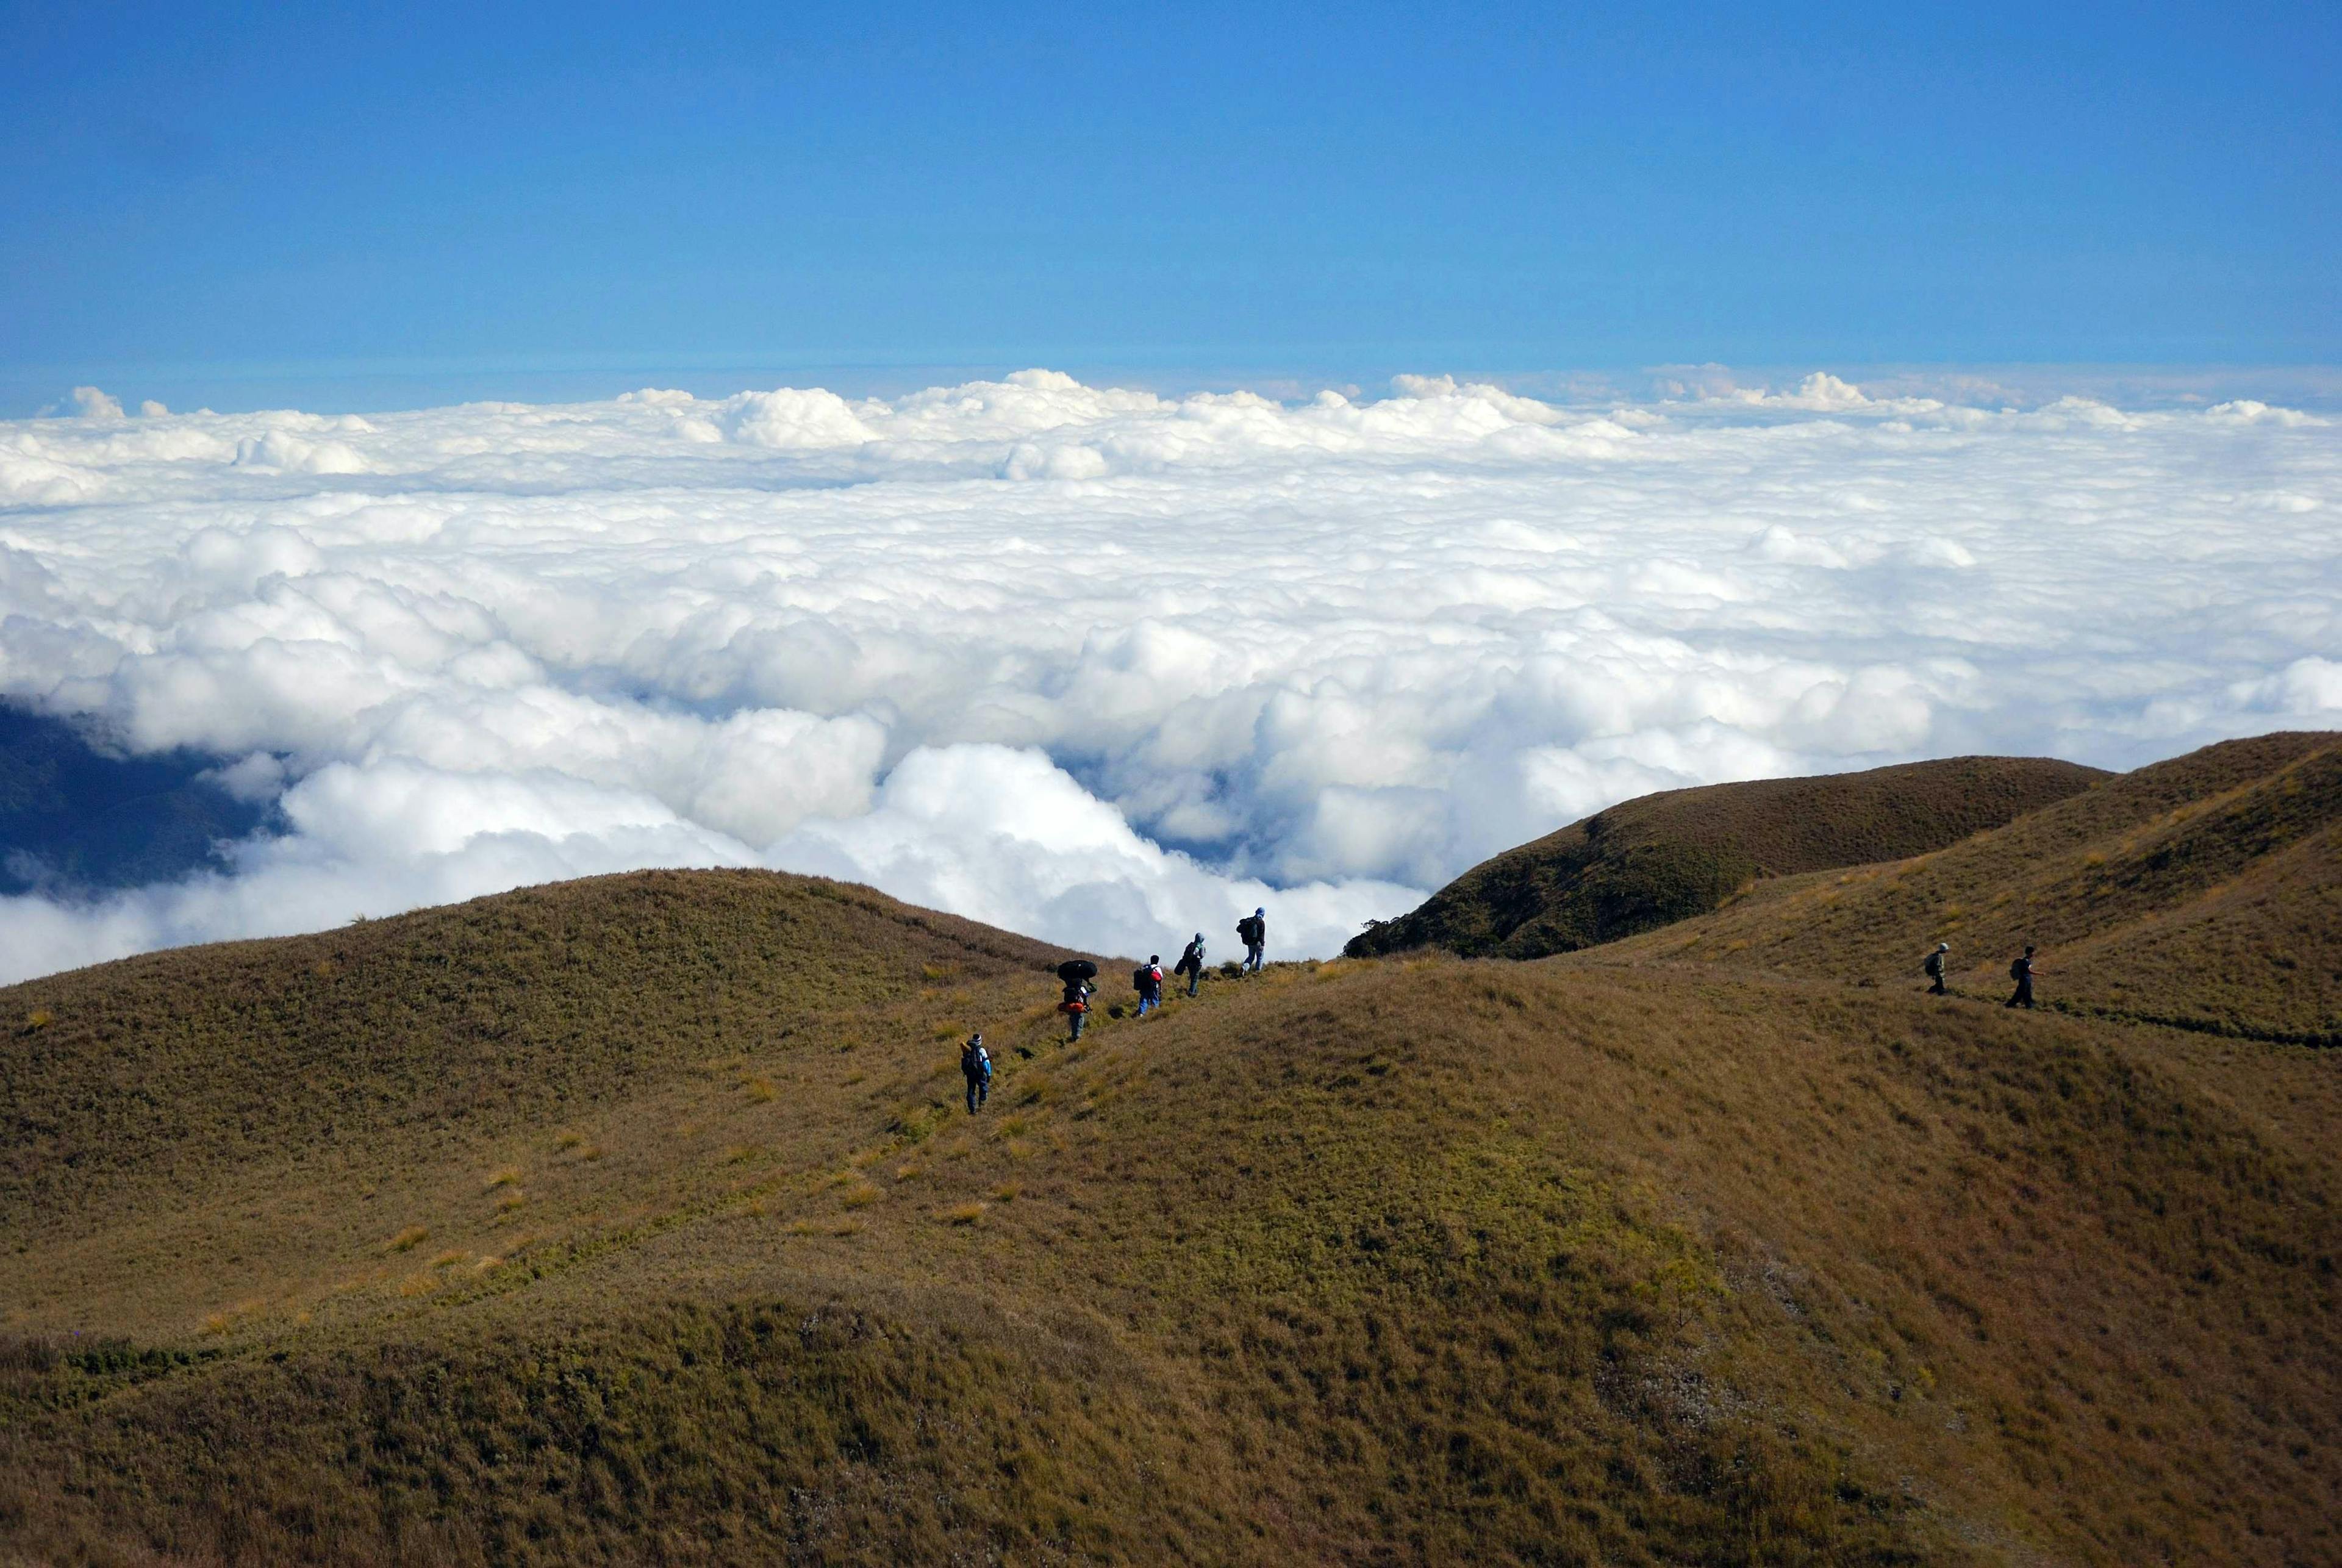 Mount Pulag in Philippines.